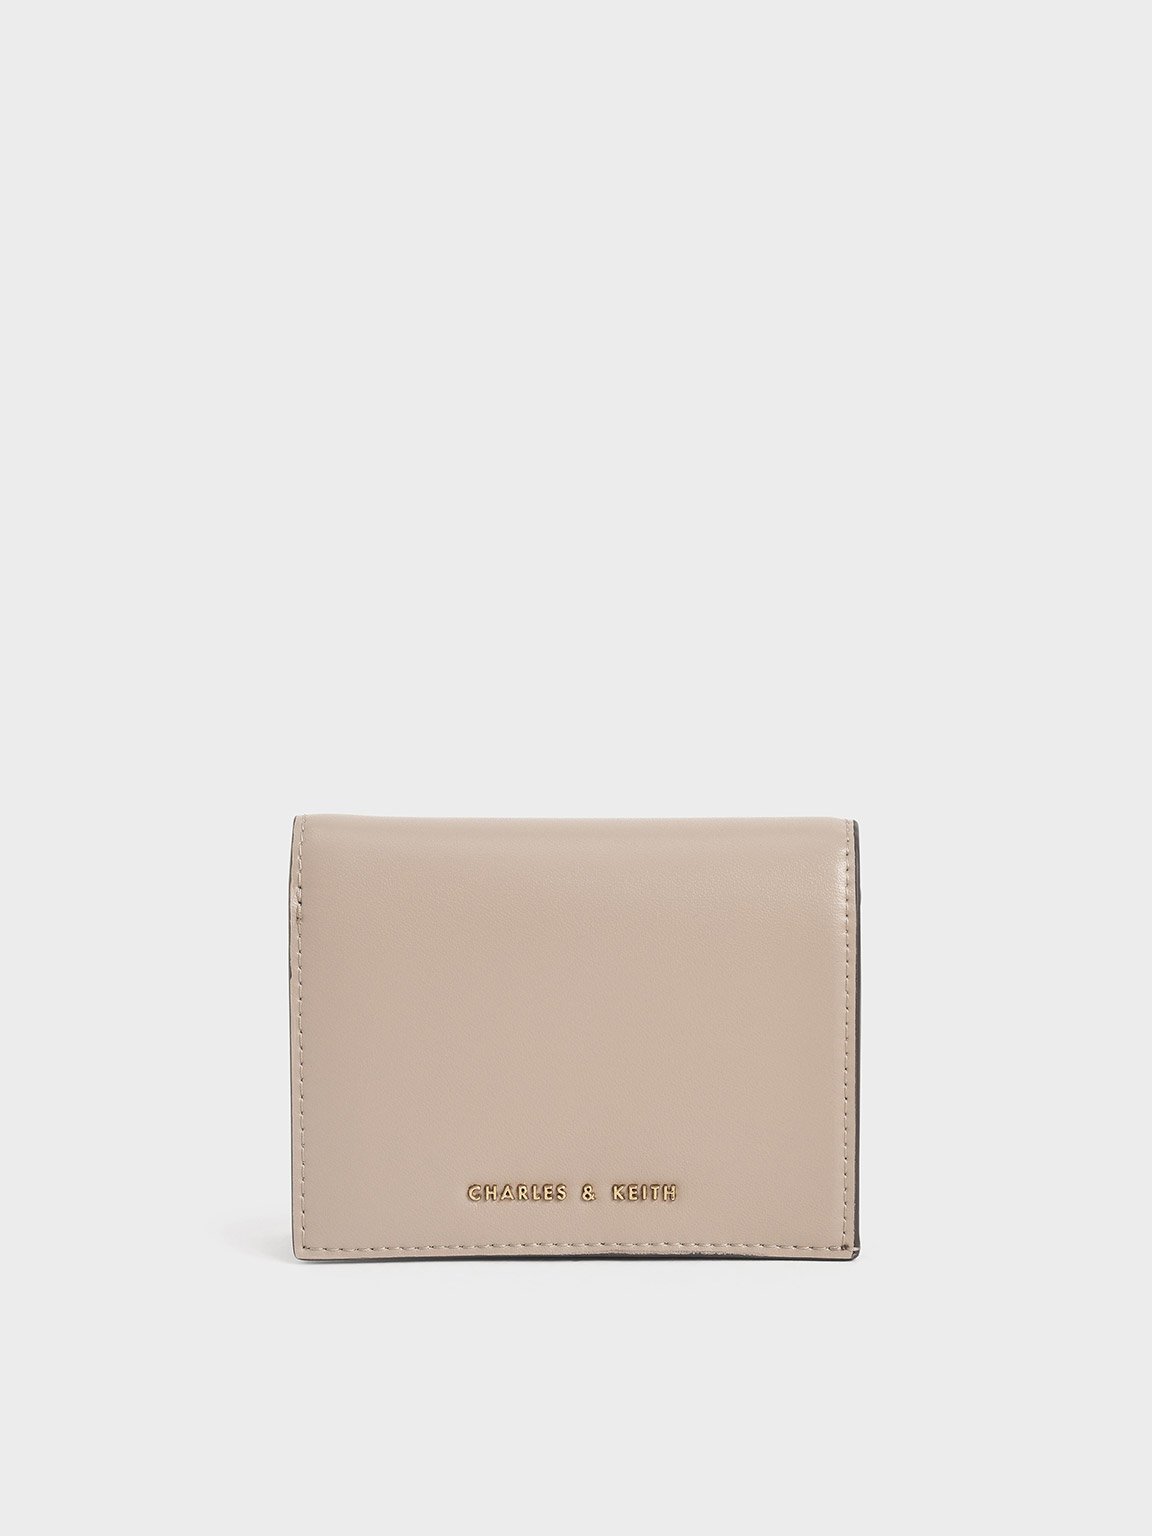 Charles & Keith Women's Snap Button Mini Short Wallet